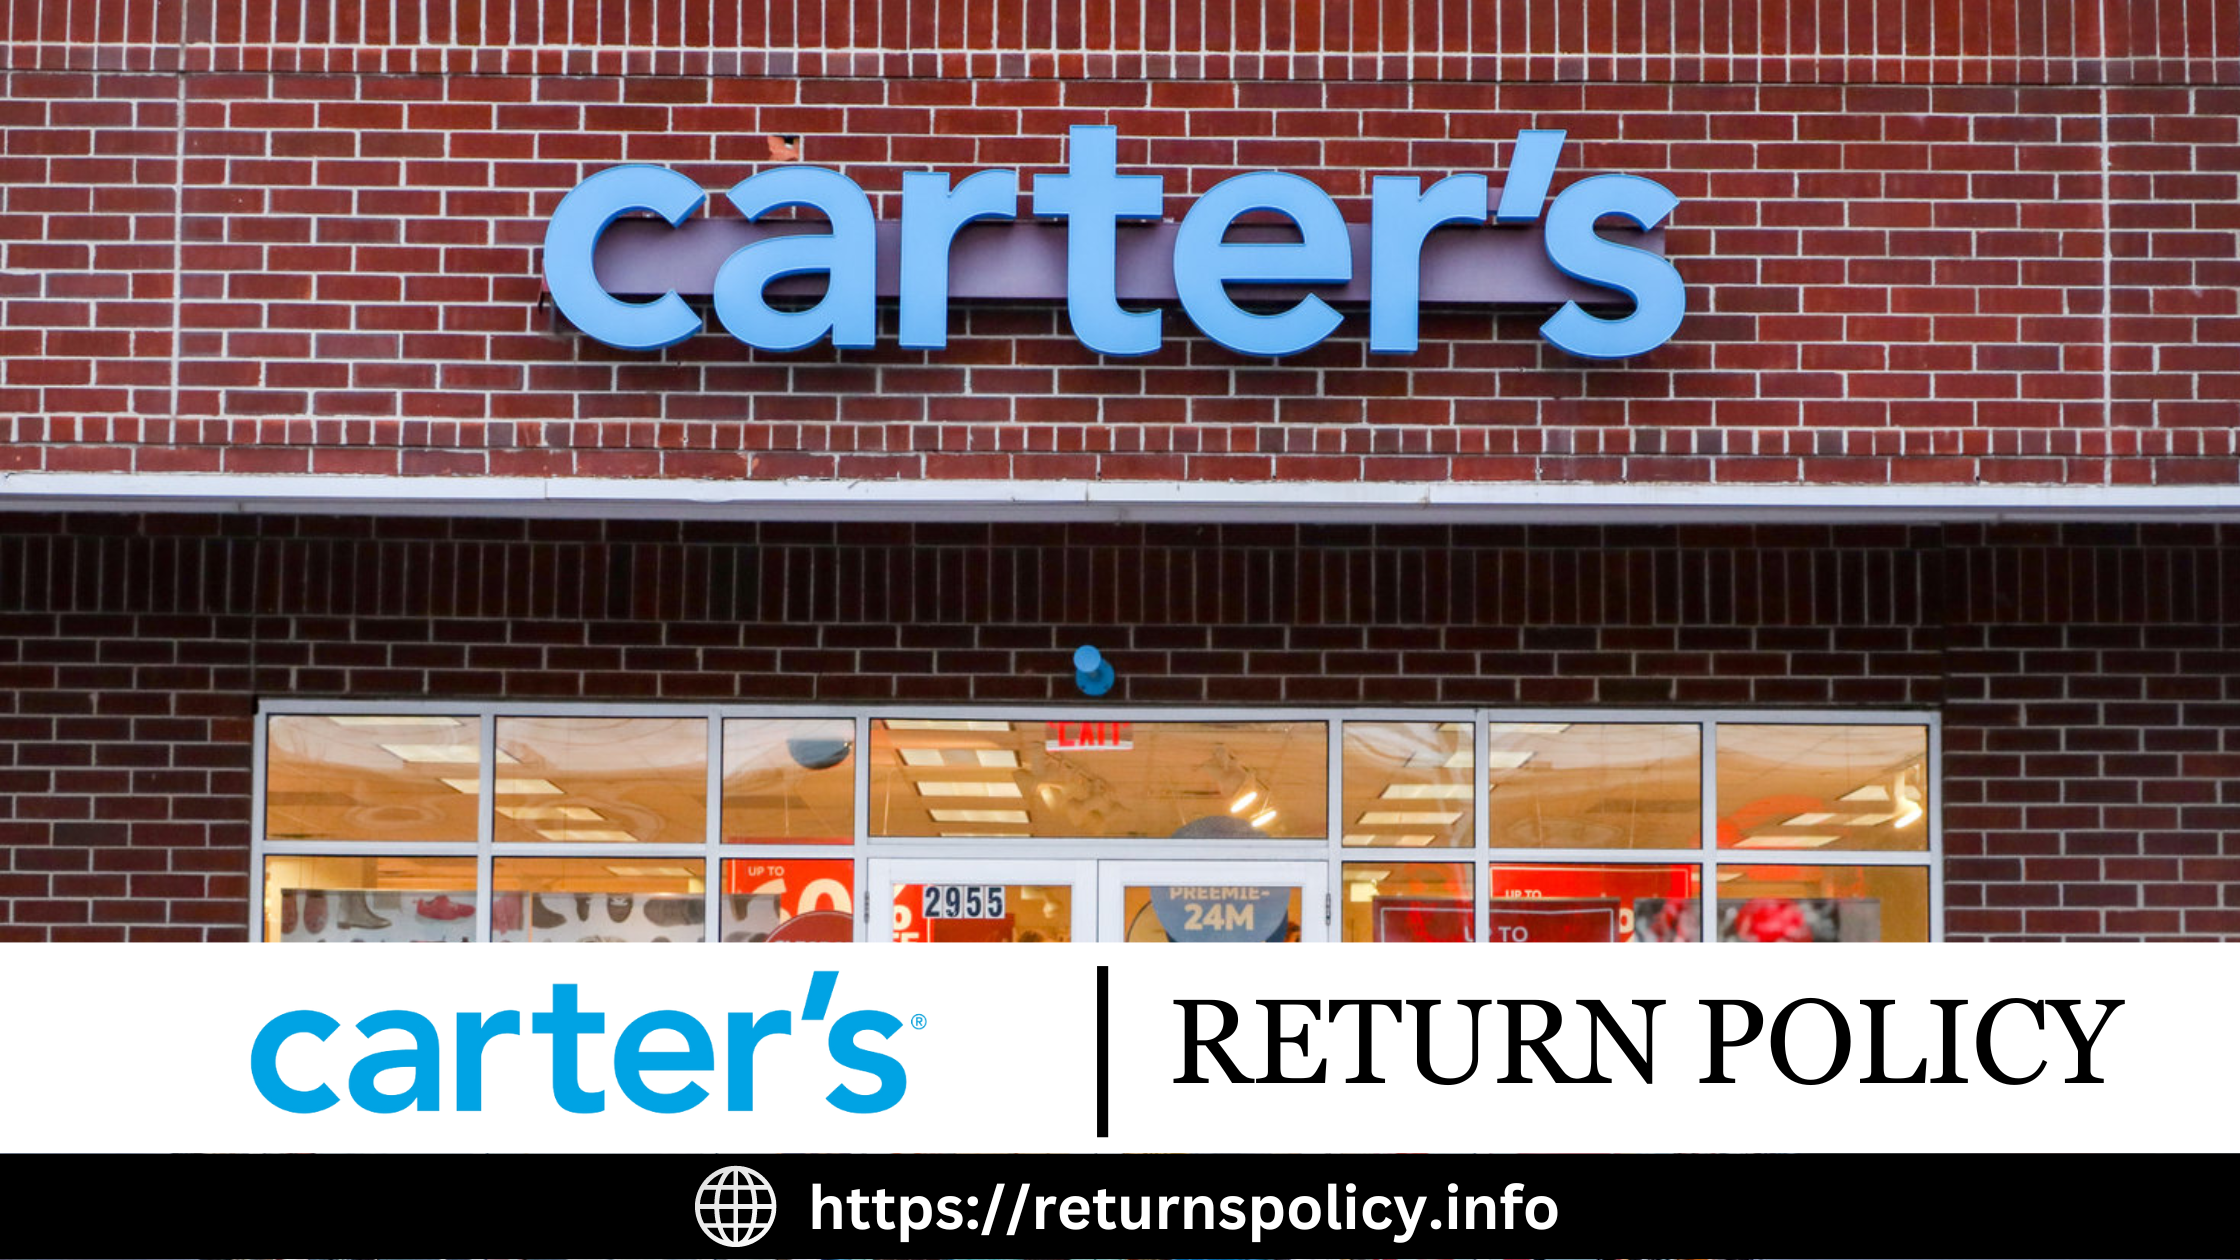 Carter's Return Policy